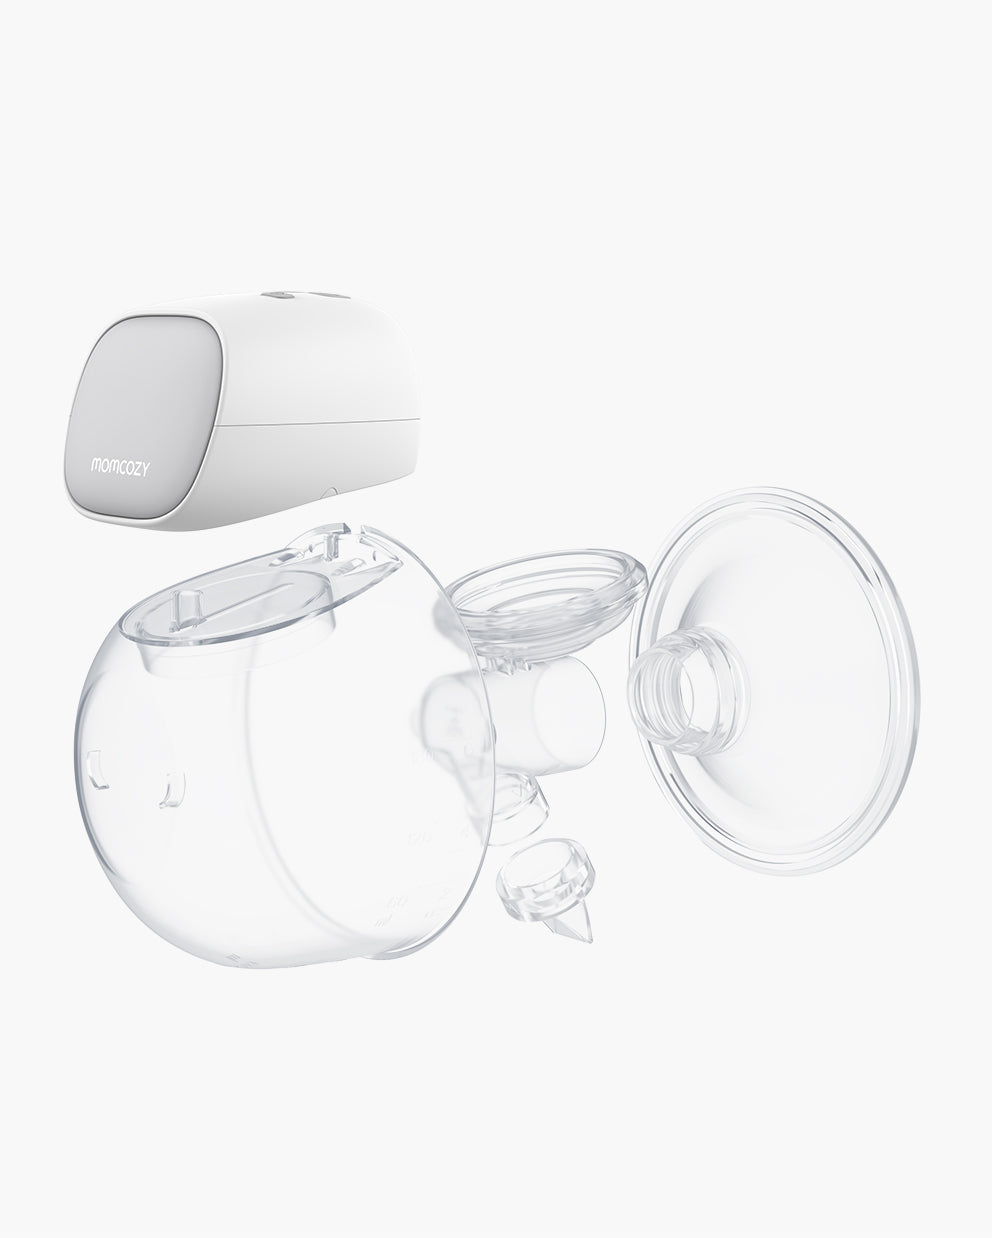 S9 Pro Wearable Breast Pump Gray Parts